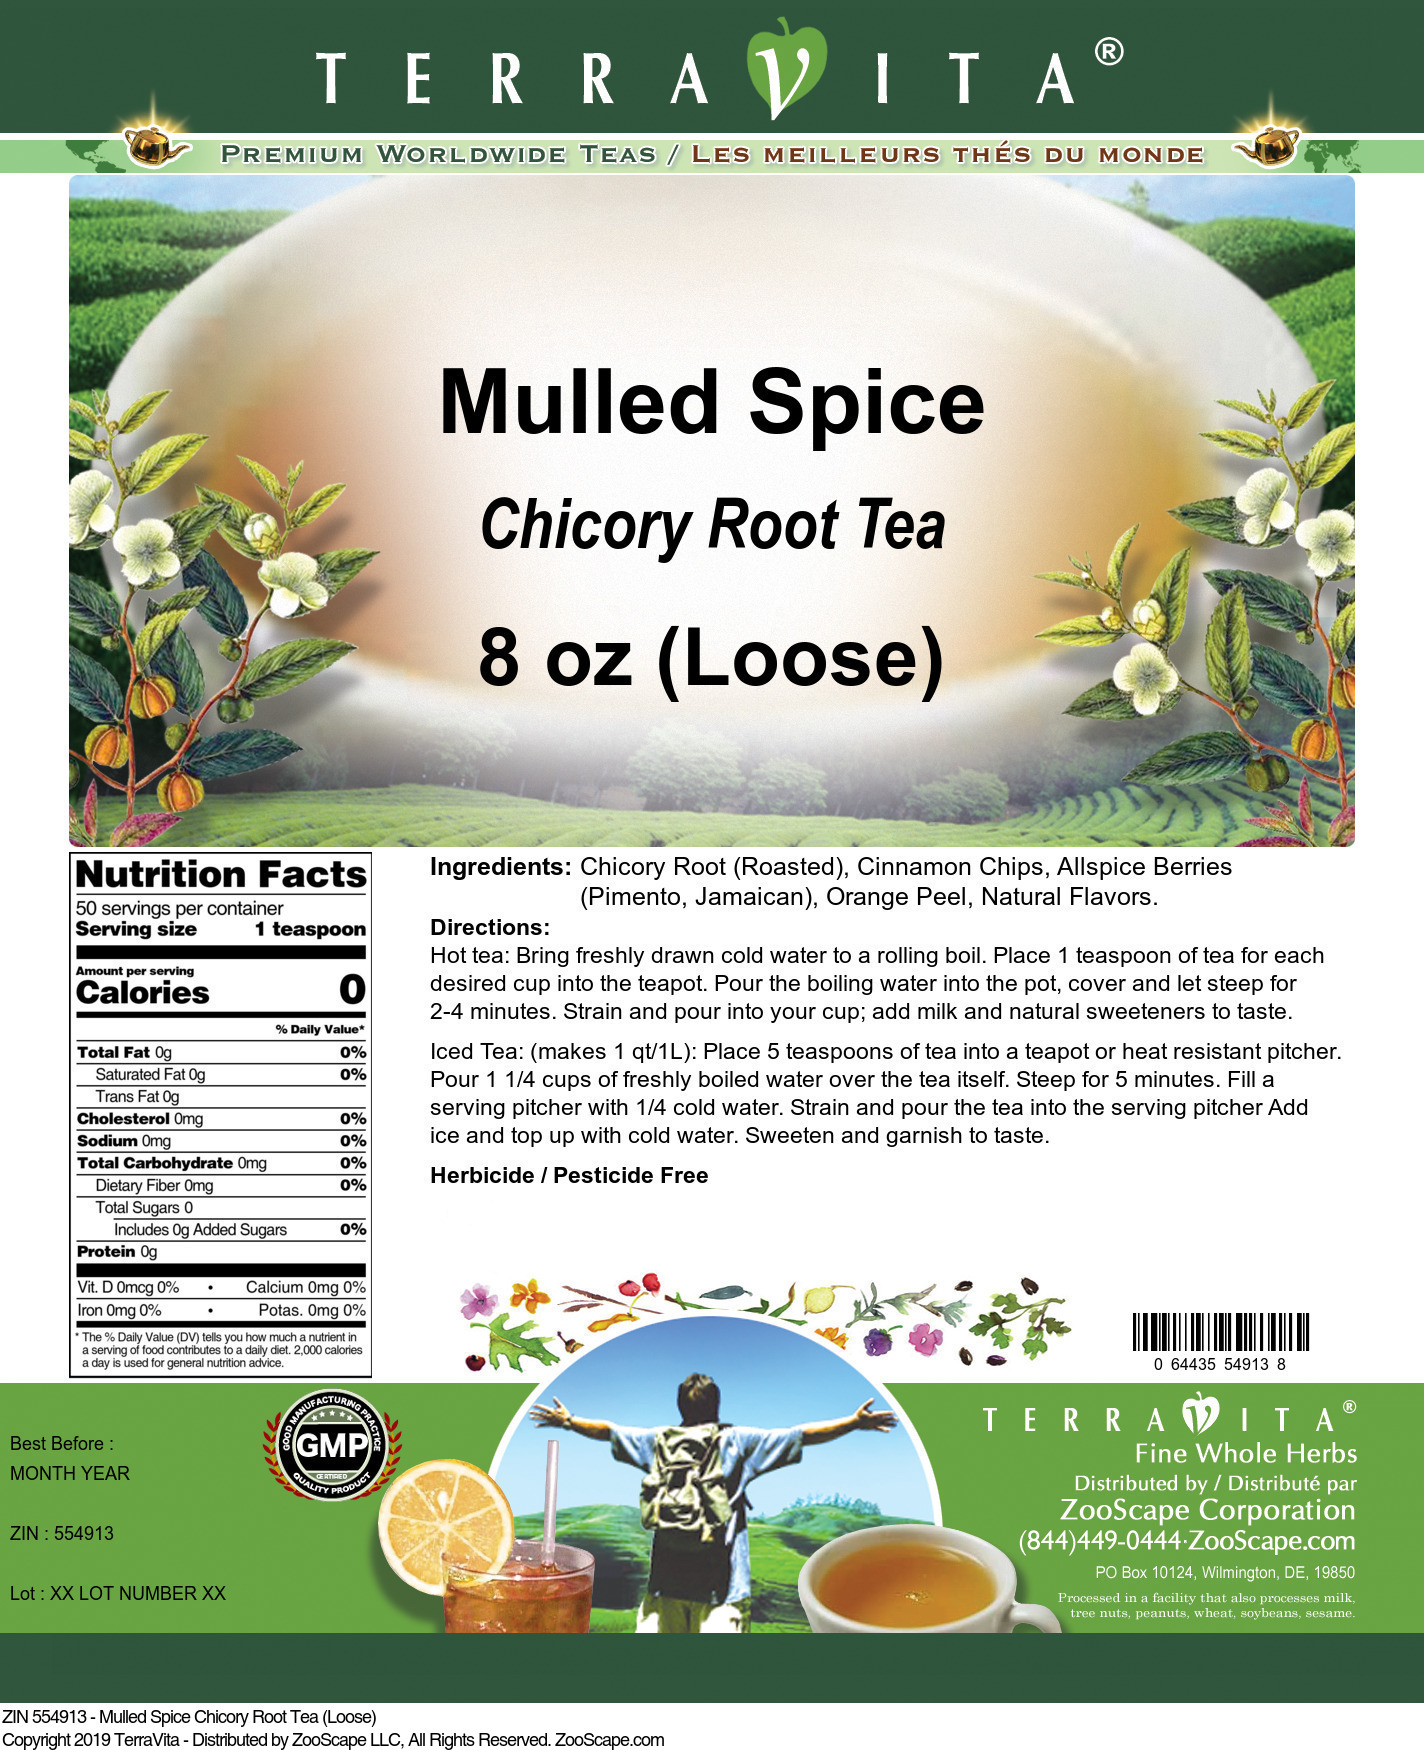 Mulled Spice Chicory Root Tea (Loose) - Label